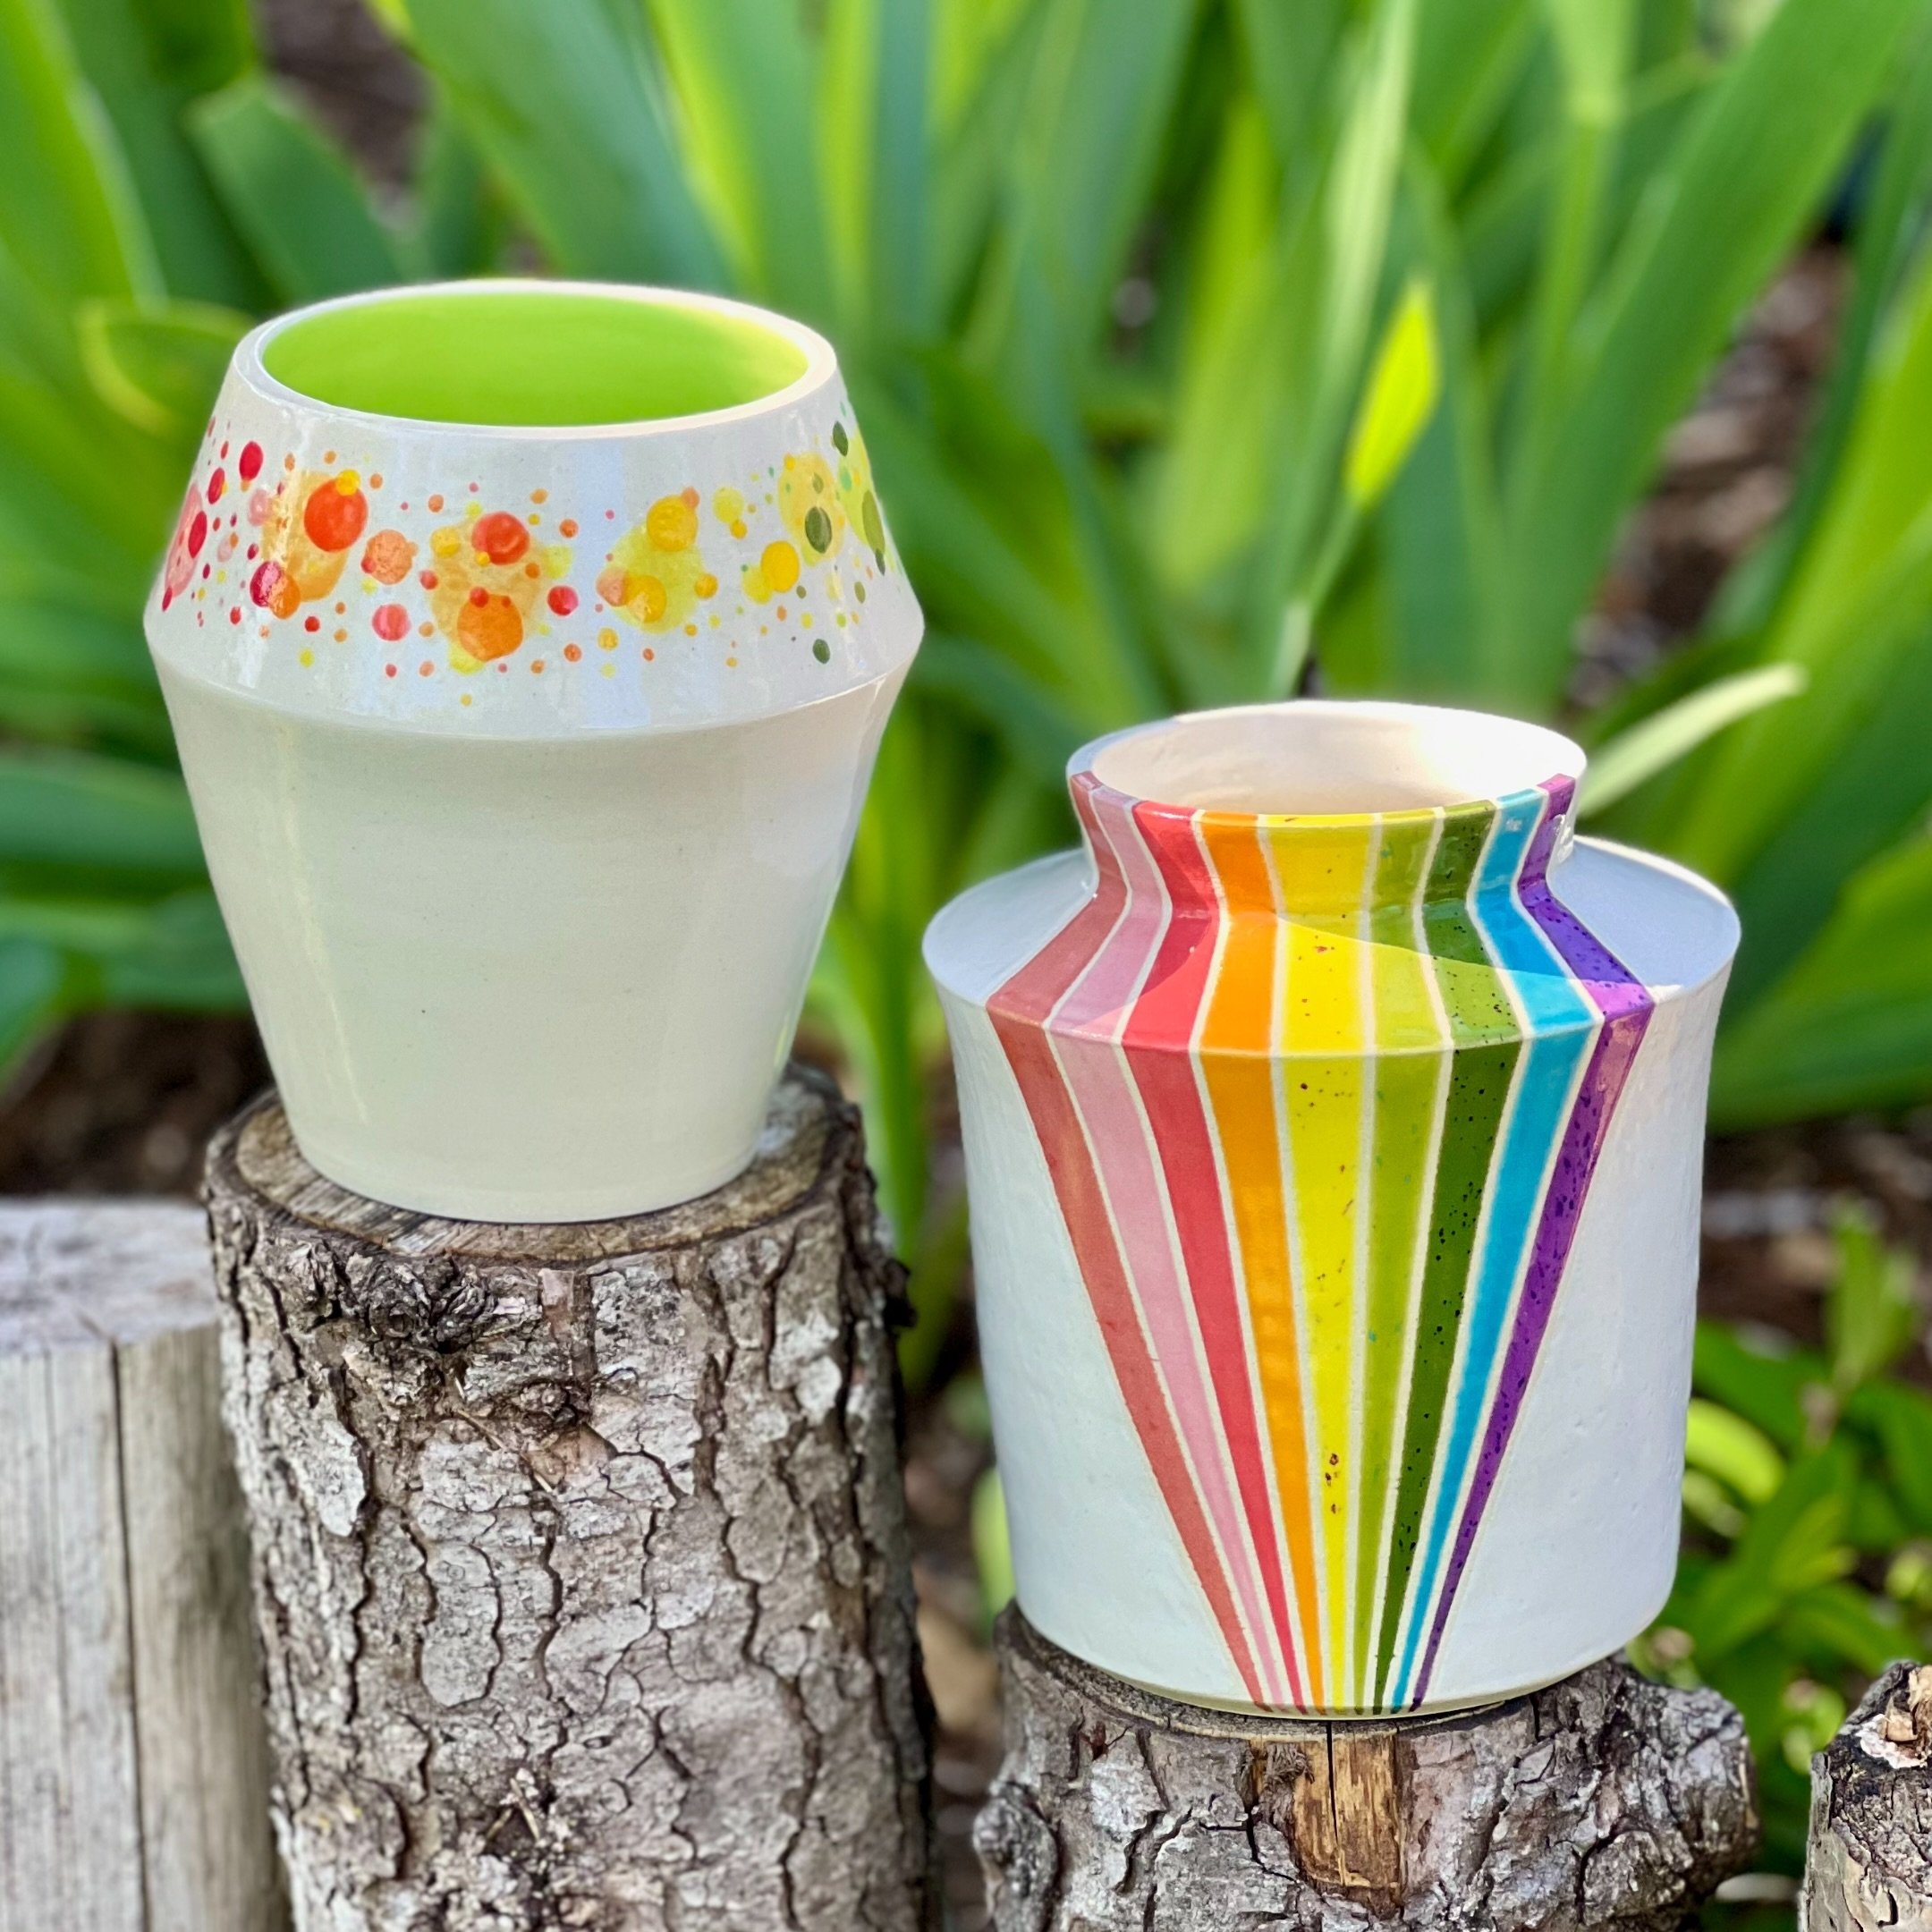 These two beauties are heading out to their new home today! I absolutely love these two large vases and hope they bring joy to their new family. 🌈💖
.
.
.
.
.
#RainbowPottery #RainbowCeramics #RainbowVase #ColorfulPottery #ColorCeramics #ColorfulVas